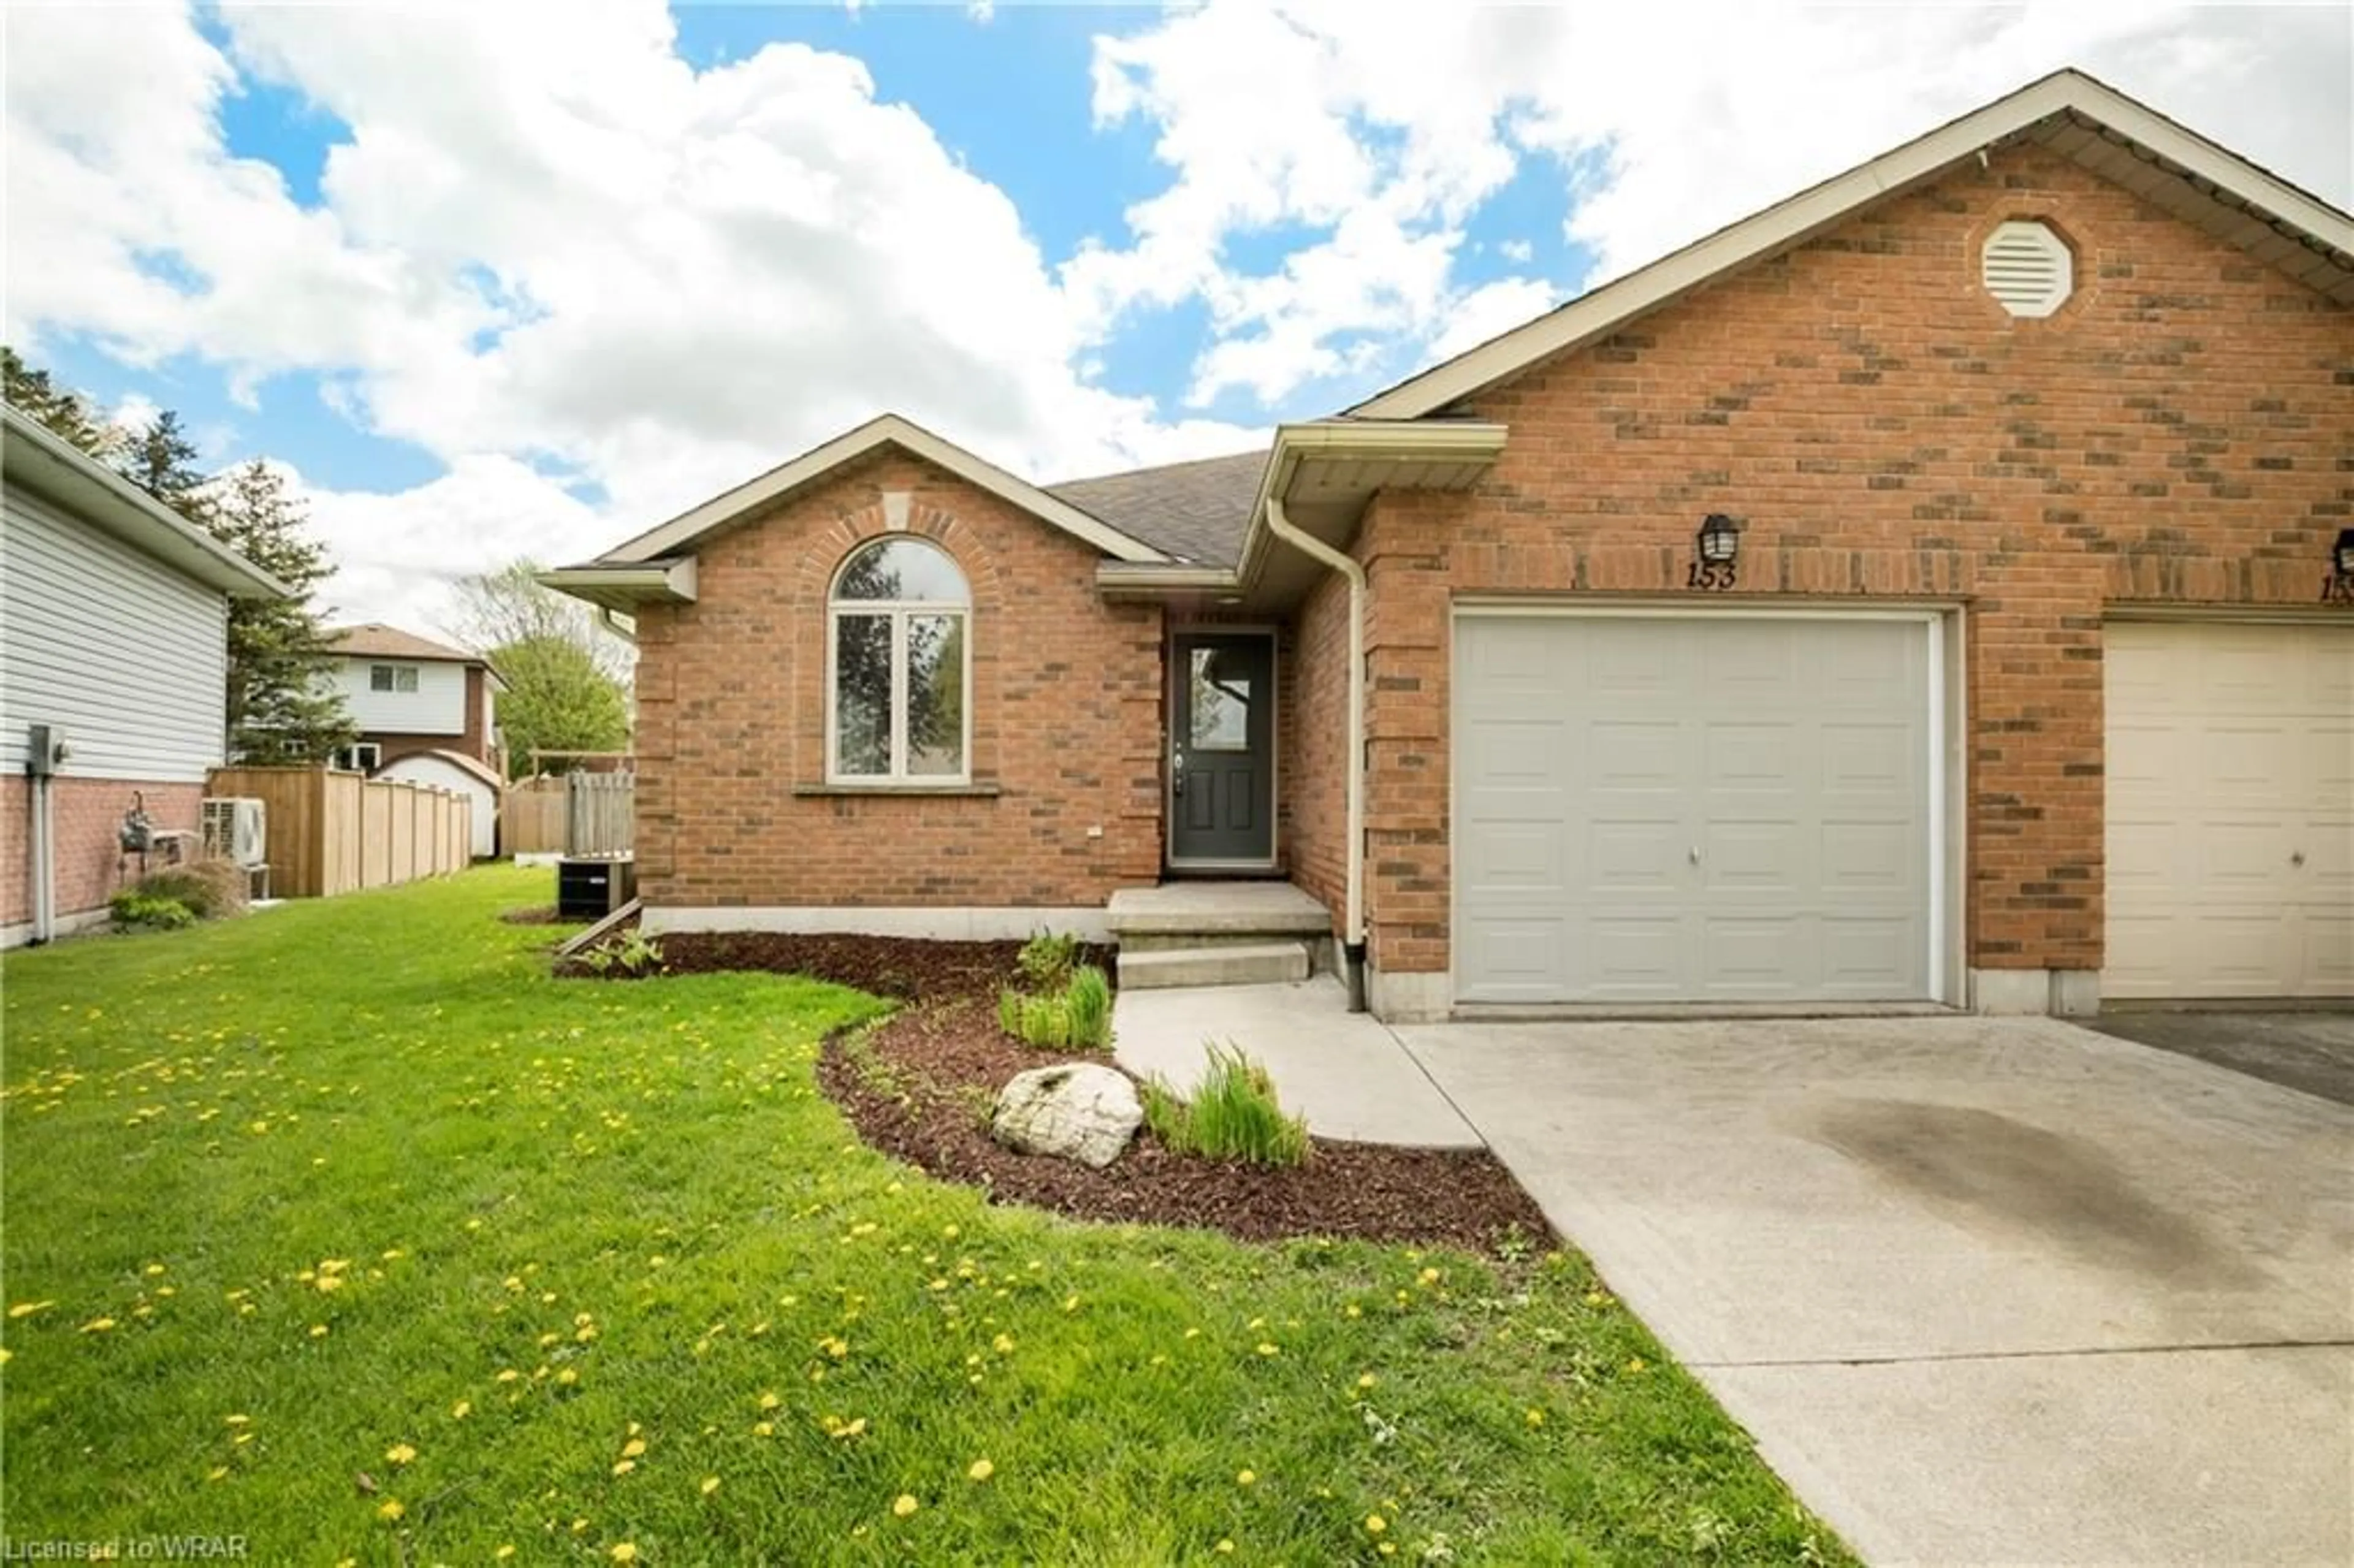 Home with brick exterior material for 153 Blenheim Crt, Mitchell Ontario N0K 1N0